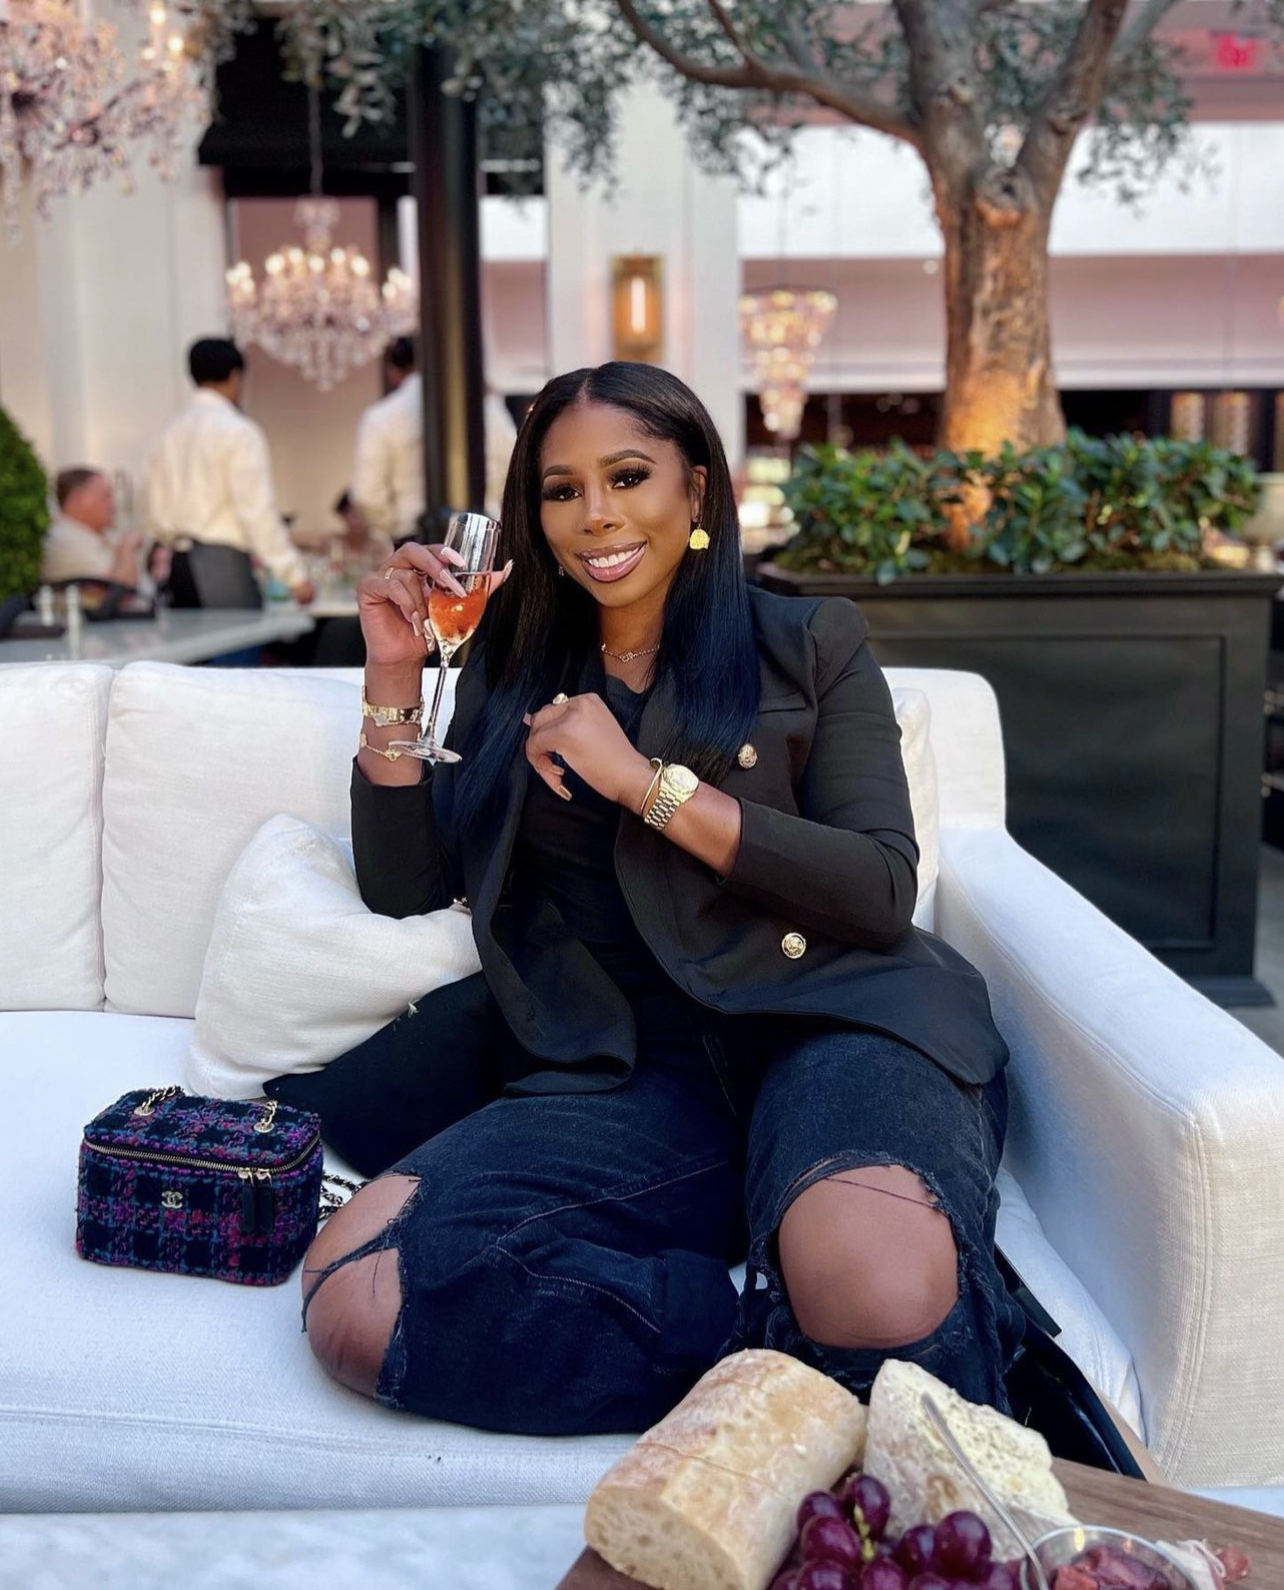 Travel Enthusiast Khloe Summer Launches New Brand To Introduce More Black Women to Luxury Travel